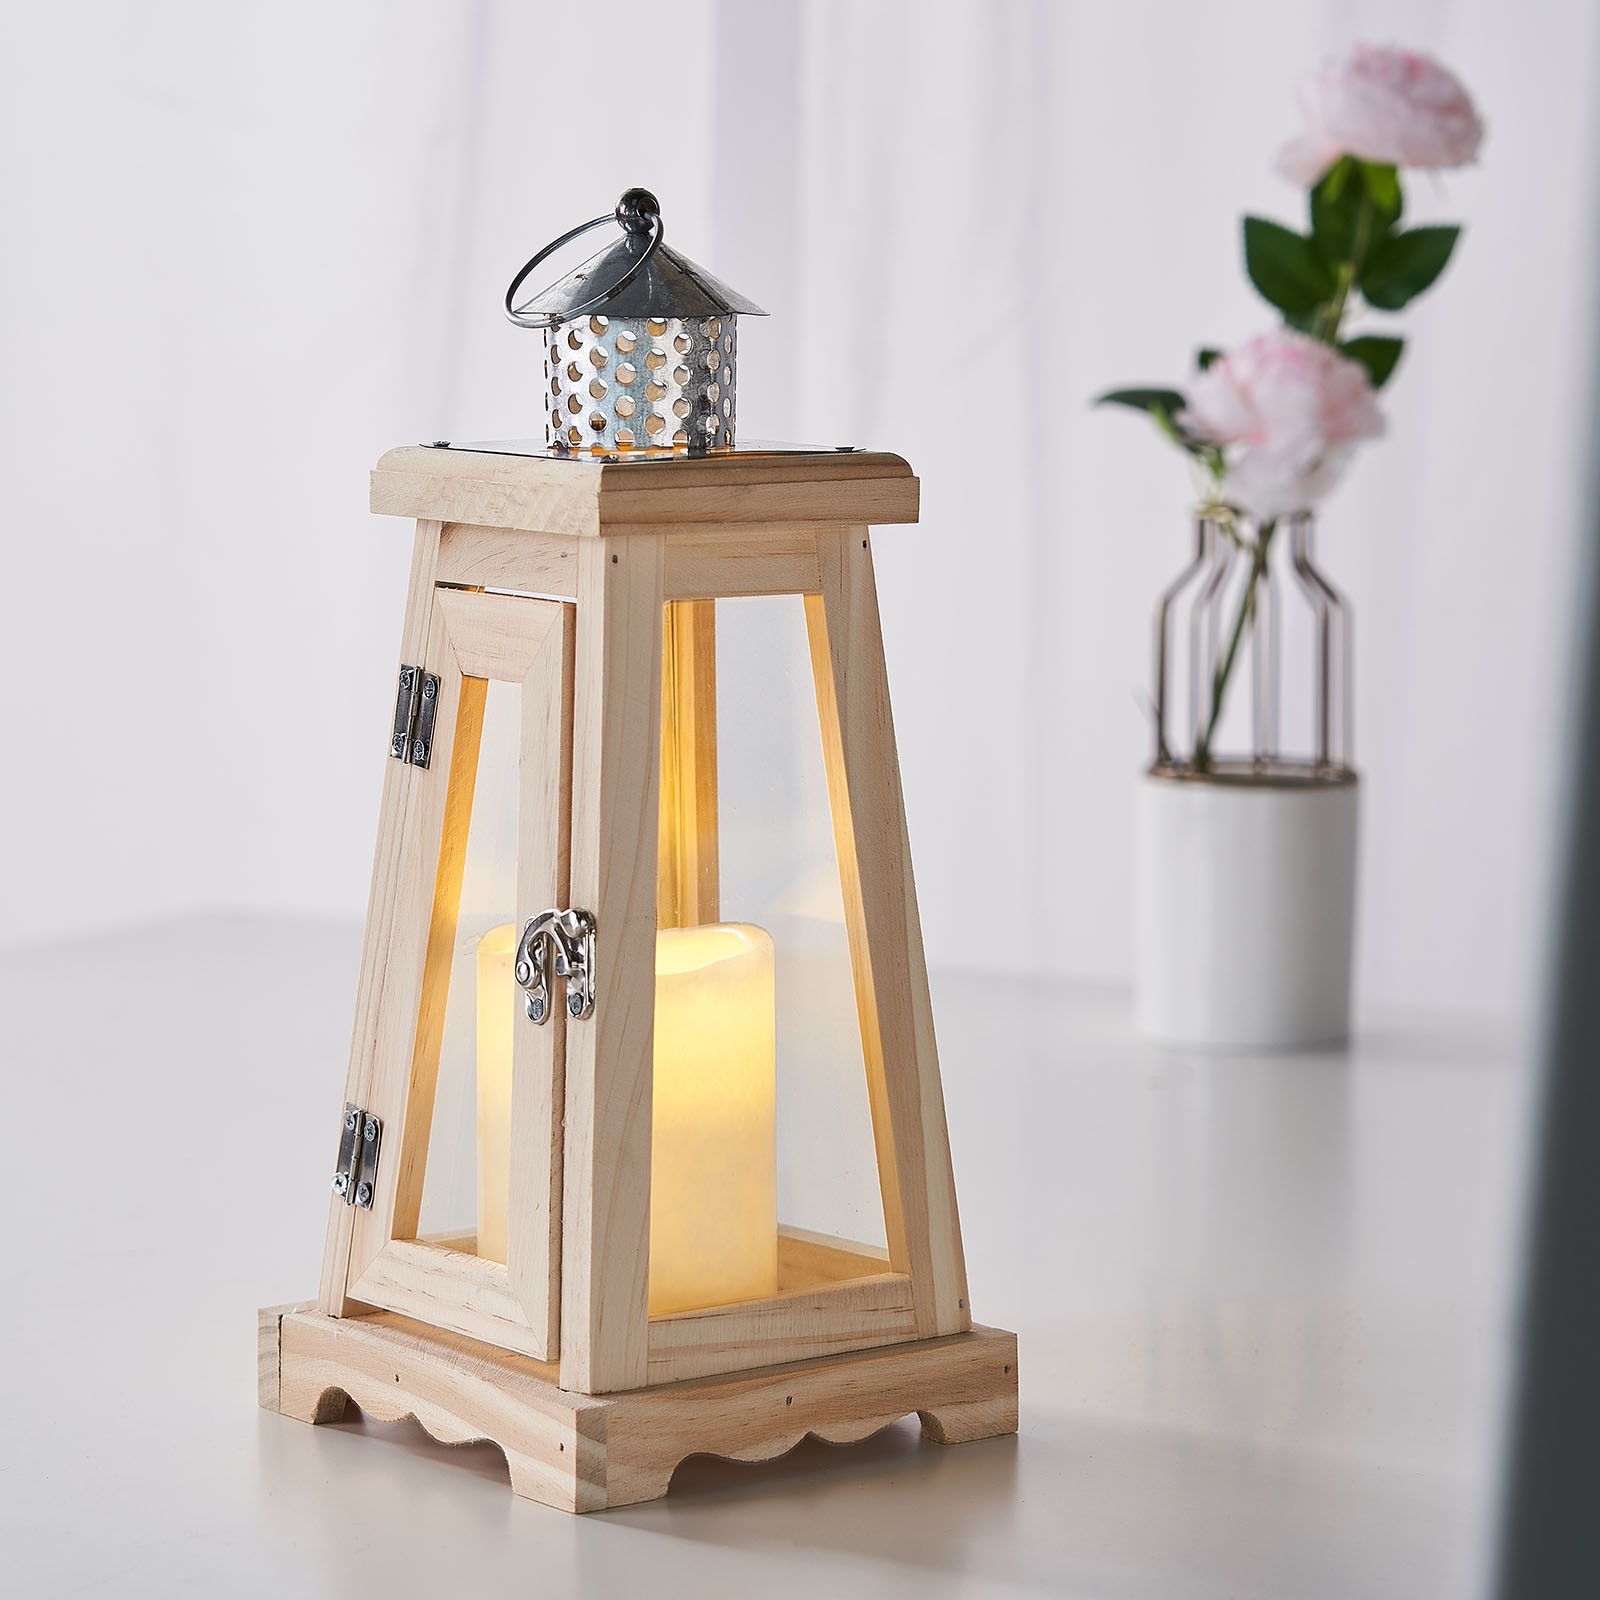 rustic wooden lantern candle holders